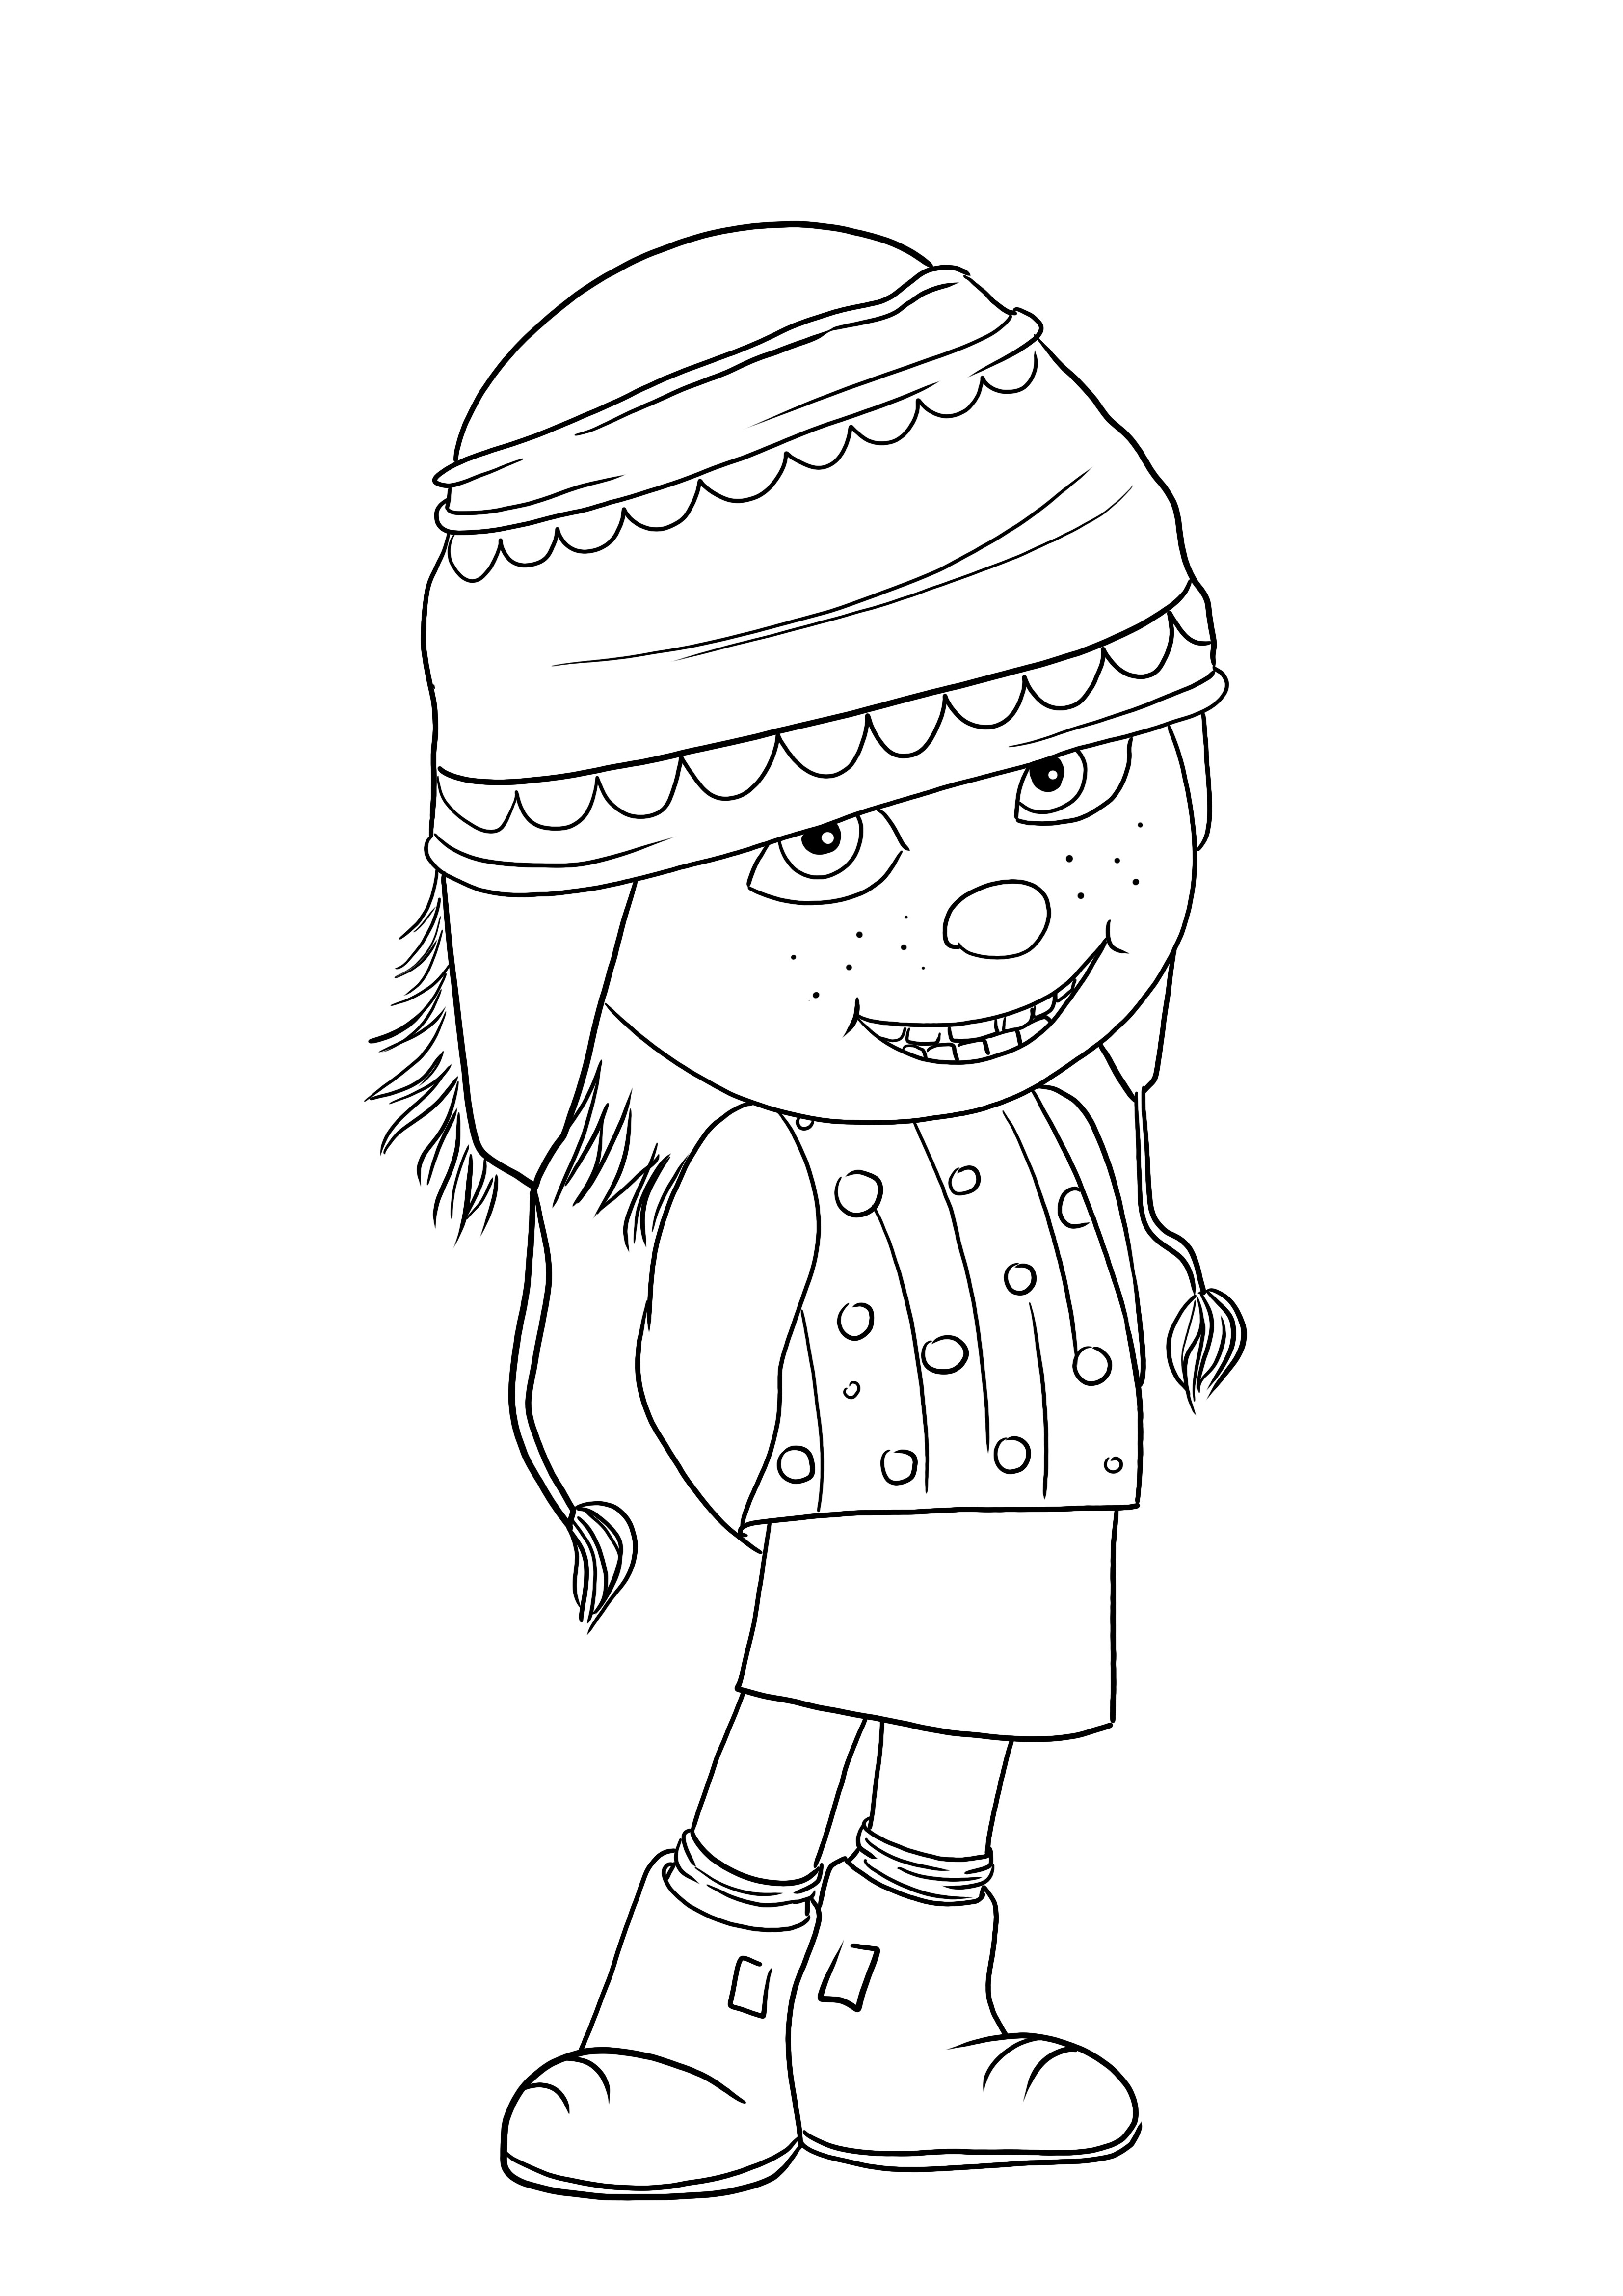 Cheeky Edith Gru from Despicable Me free for printing and coloring for kids